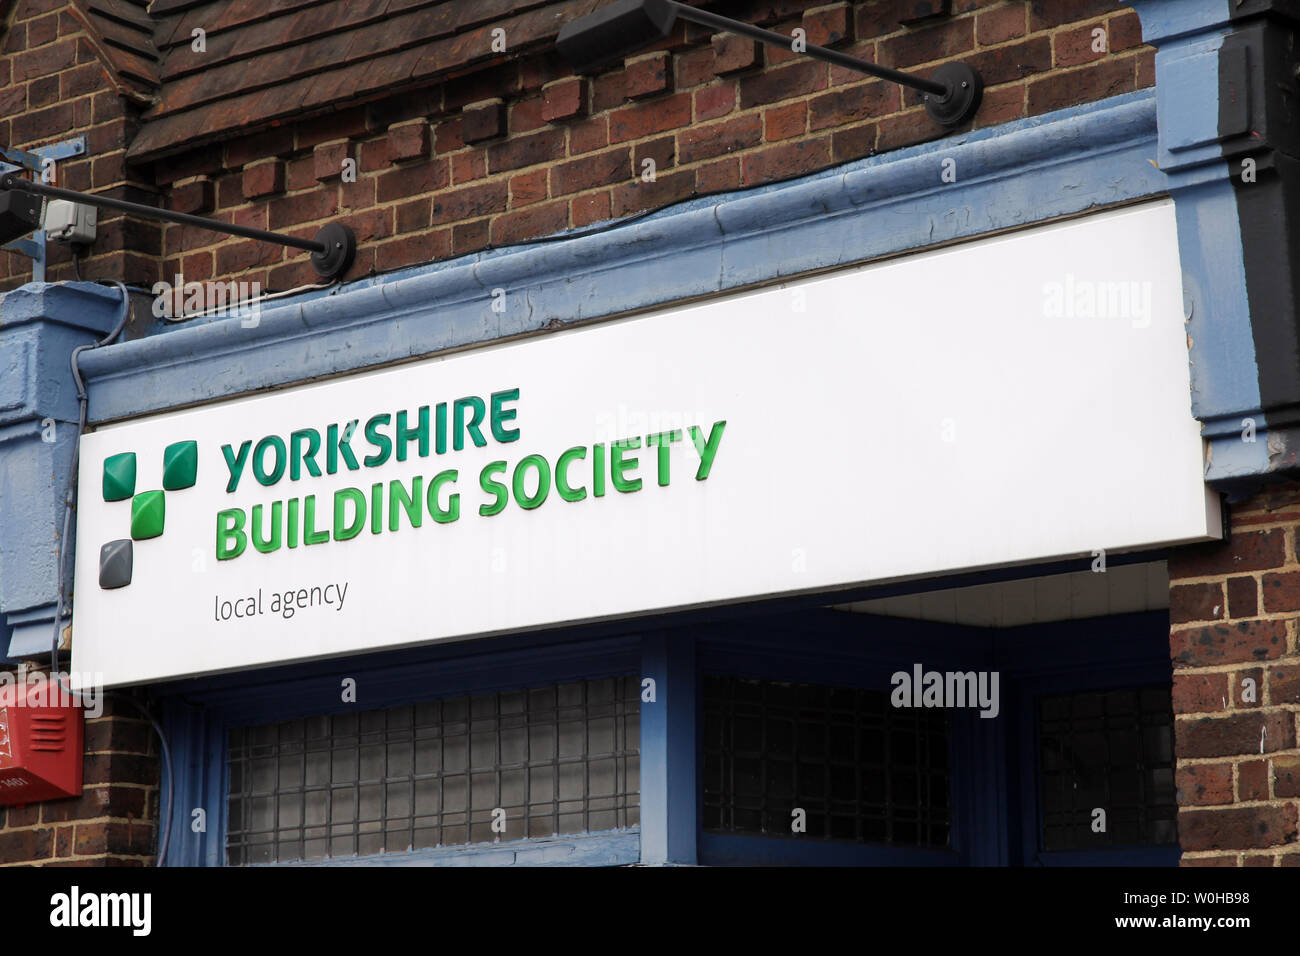 Ashtead, Surrey, UK - Sign for high street branch of Yorkshire Building Society, external facade, local agency Stock Photo